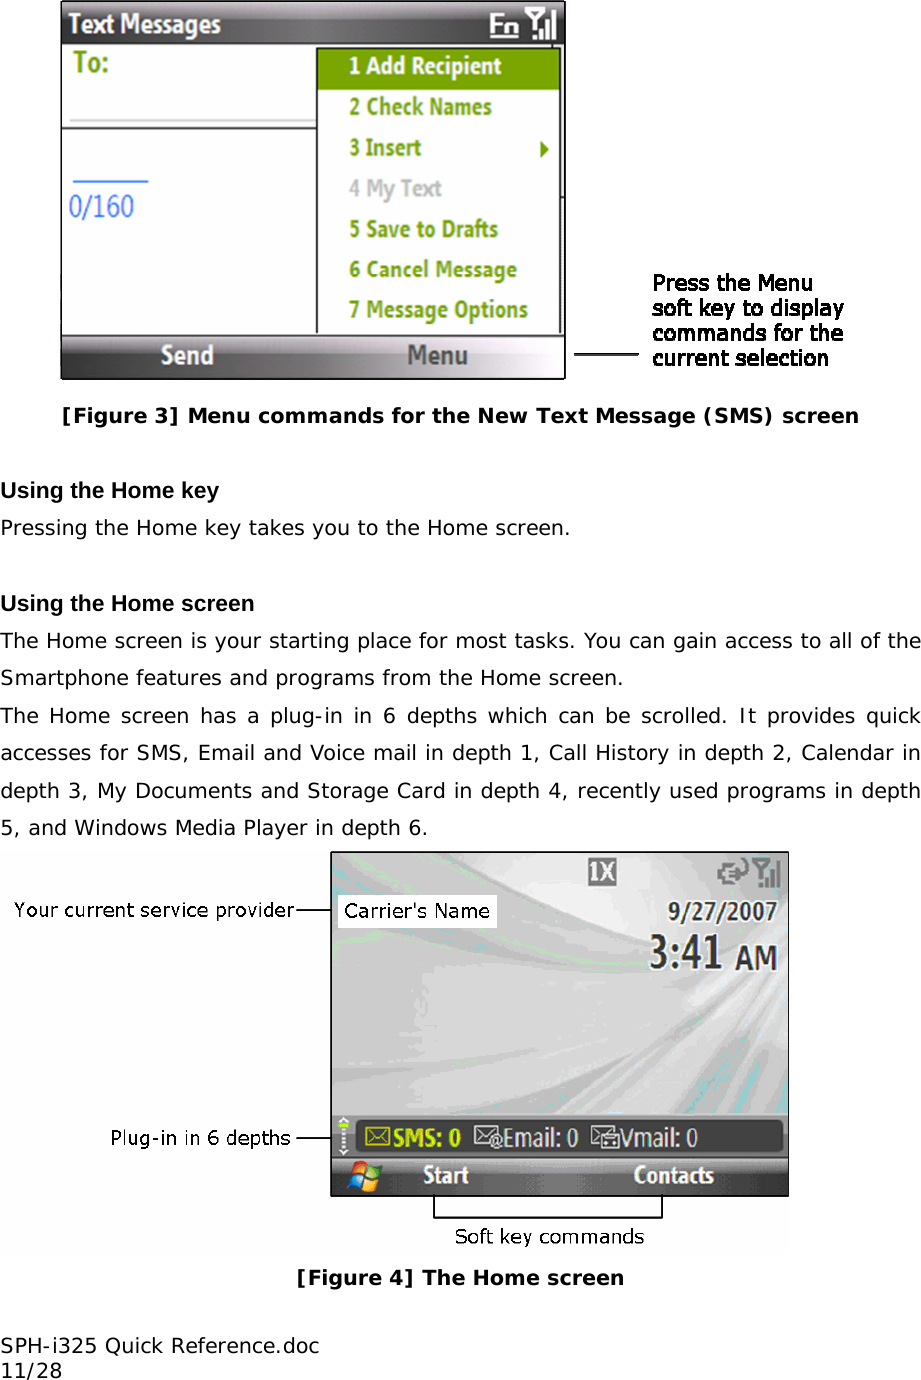  [Figure 3] Menu commands for the New Text Message (SMS) screen  Using the Home key Pressing the Home key takes you to the Home screen.  Using the Home screen The Home screen is your starting place for most tasks. You can gain access to all of the Smartphone features and programs from the Home screen. The Home screen has a plug-in in 6 depths which can be scrolled. It provides quick accesses for SMS, Email and Voice mail in depth 1, Call History in depth 2, Calendar in depth 3, My Documents and Storage Card in depth 4, recently used programs in depth 5, and Windows Media Player in depth 6.  [Figure 4] The Home screen SPH-i325 Quick Reference.doc                                                          11/28 